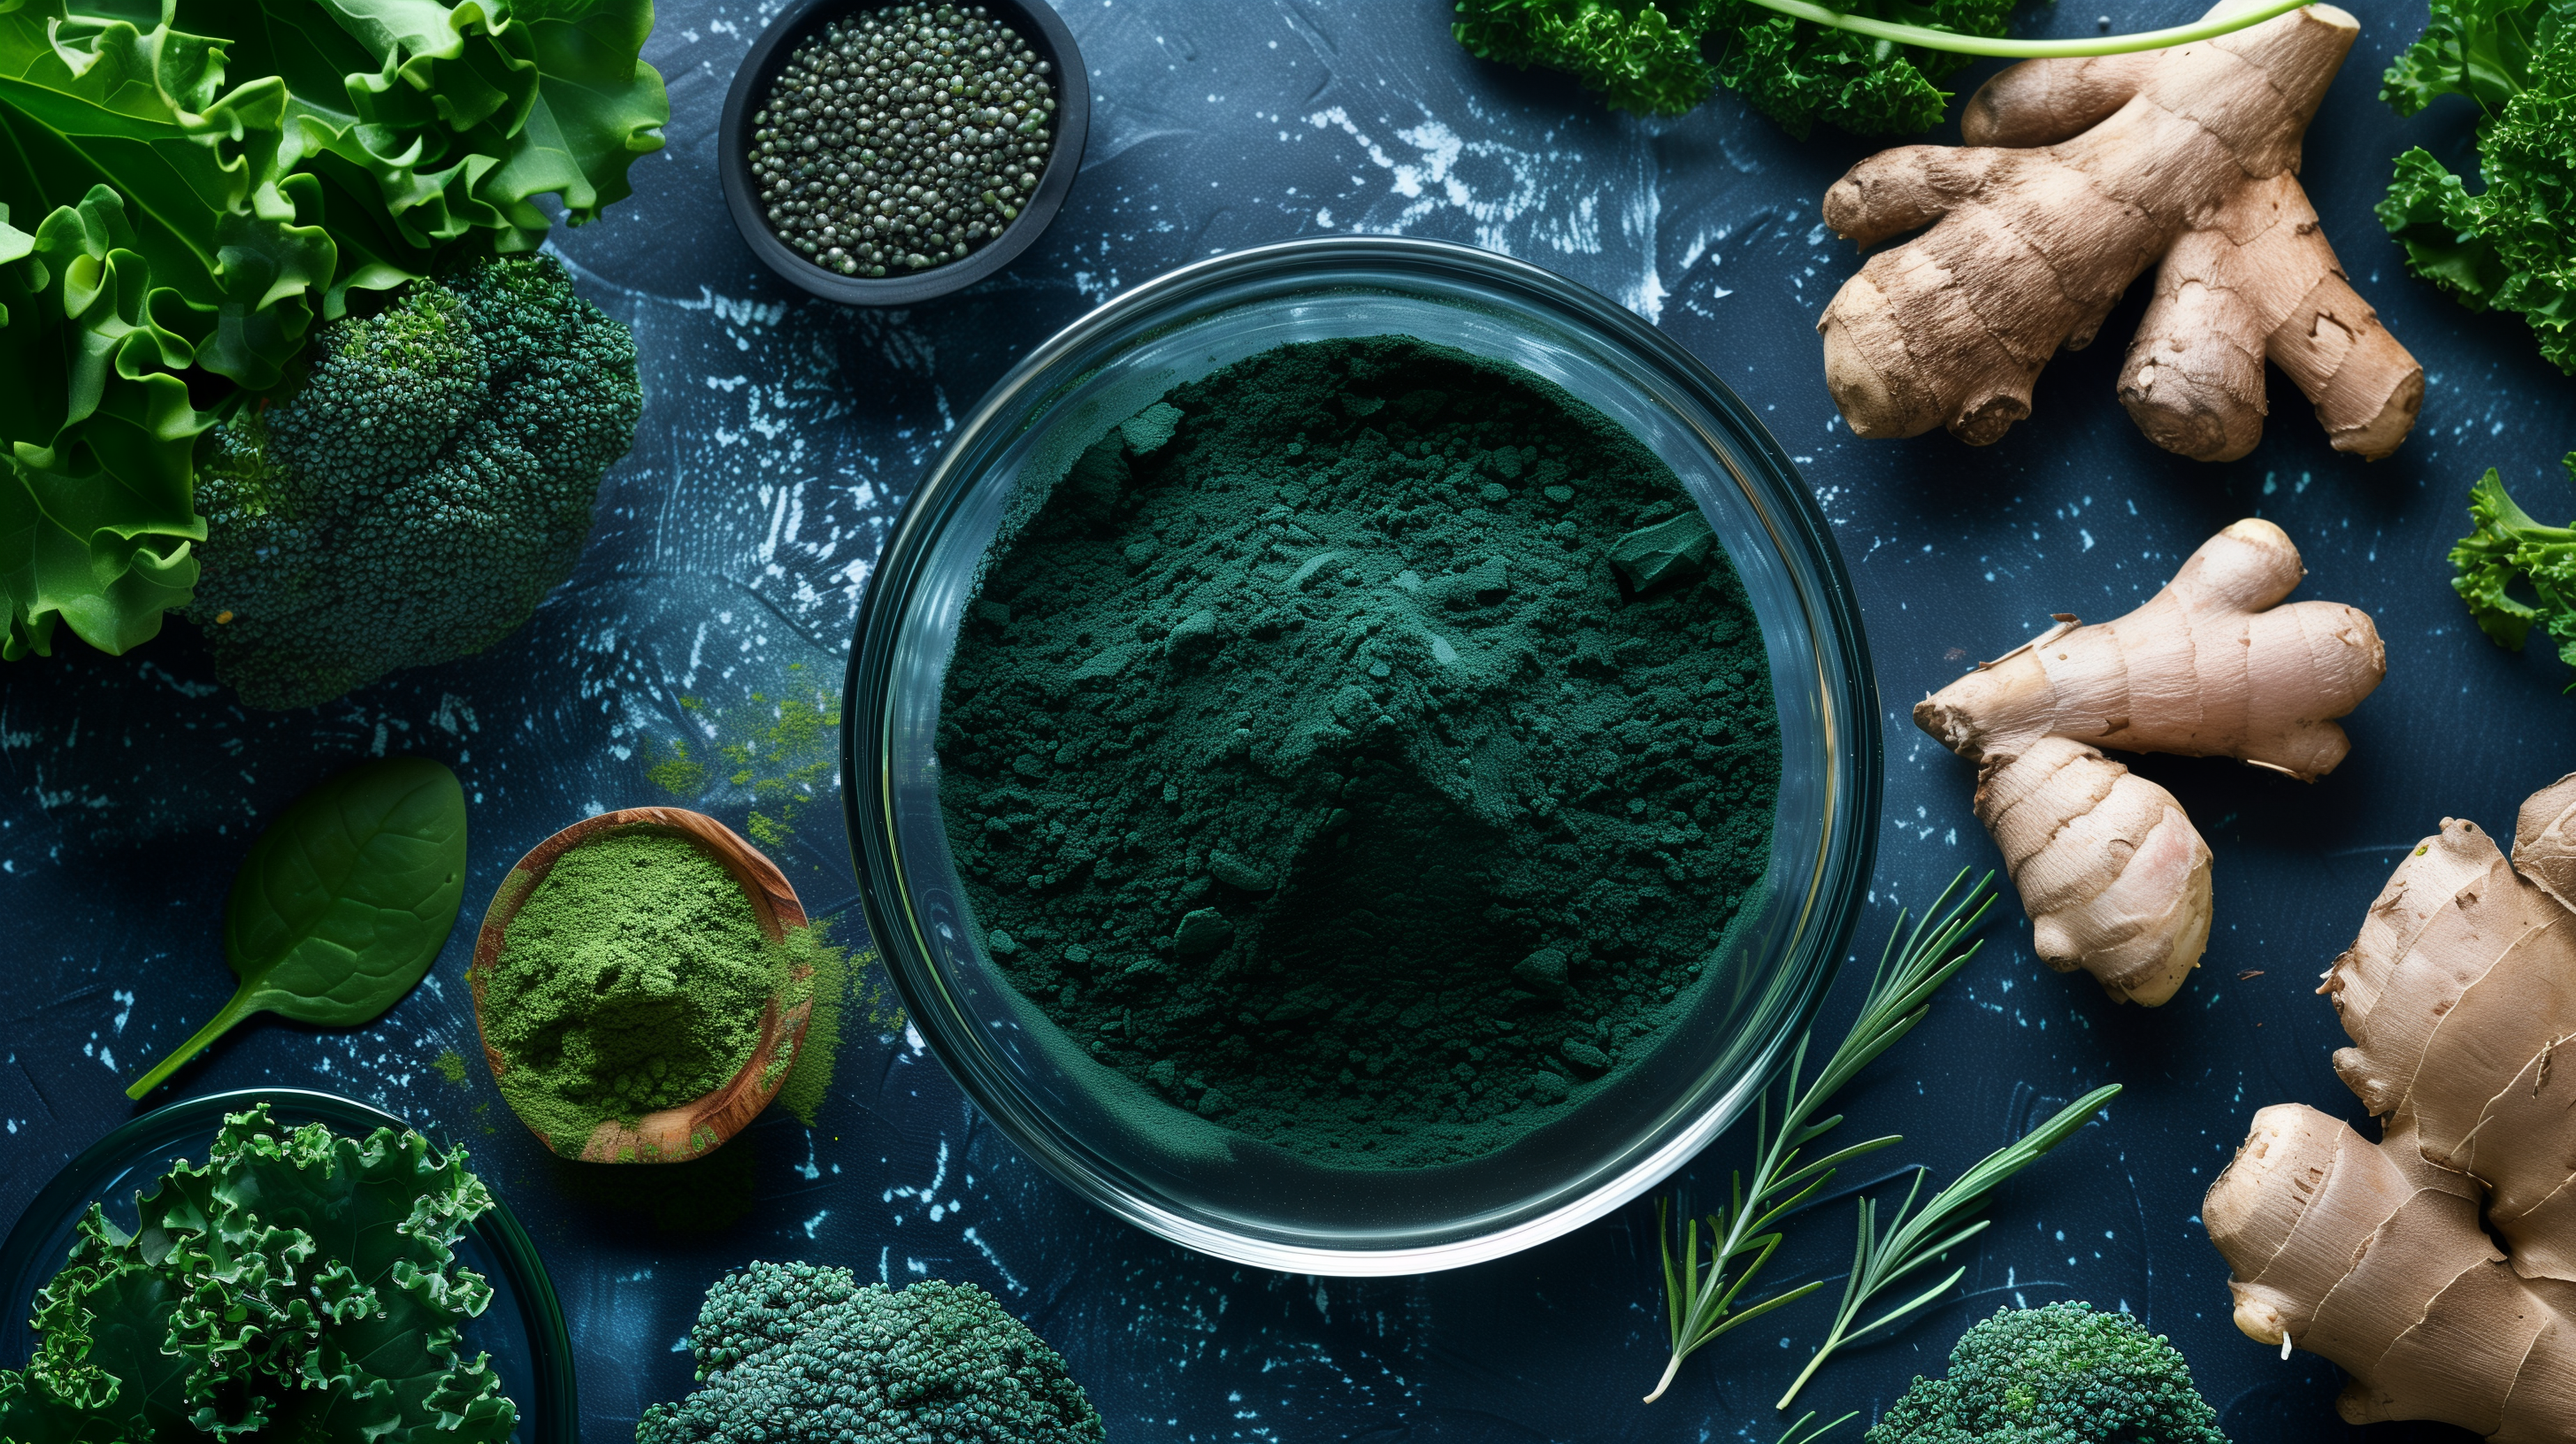 greens powder and ingredients like kale, spinach, spirulina, and ginger roots